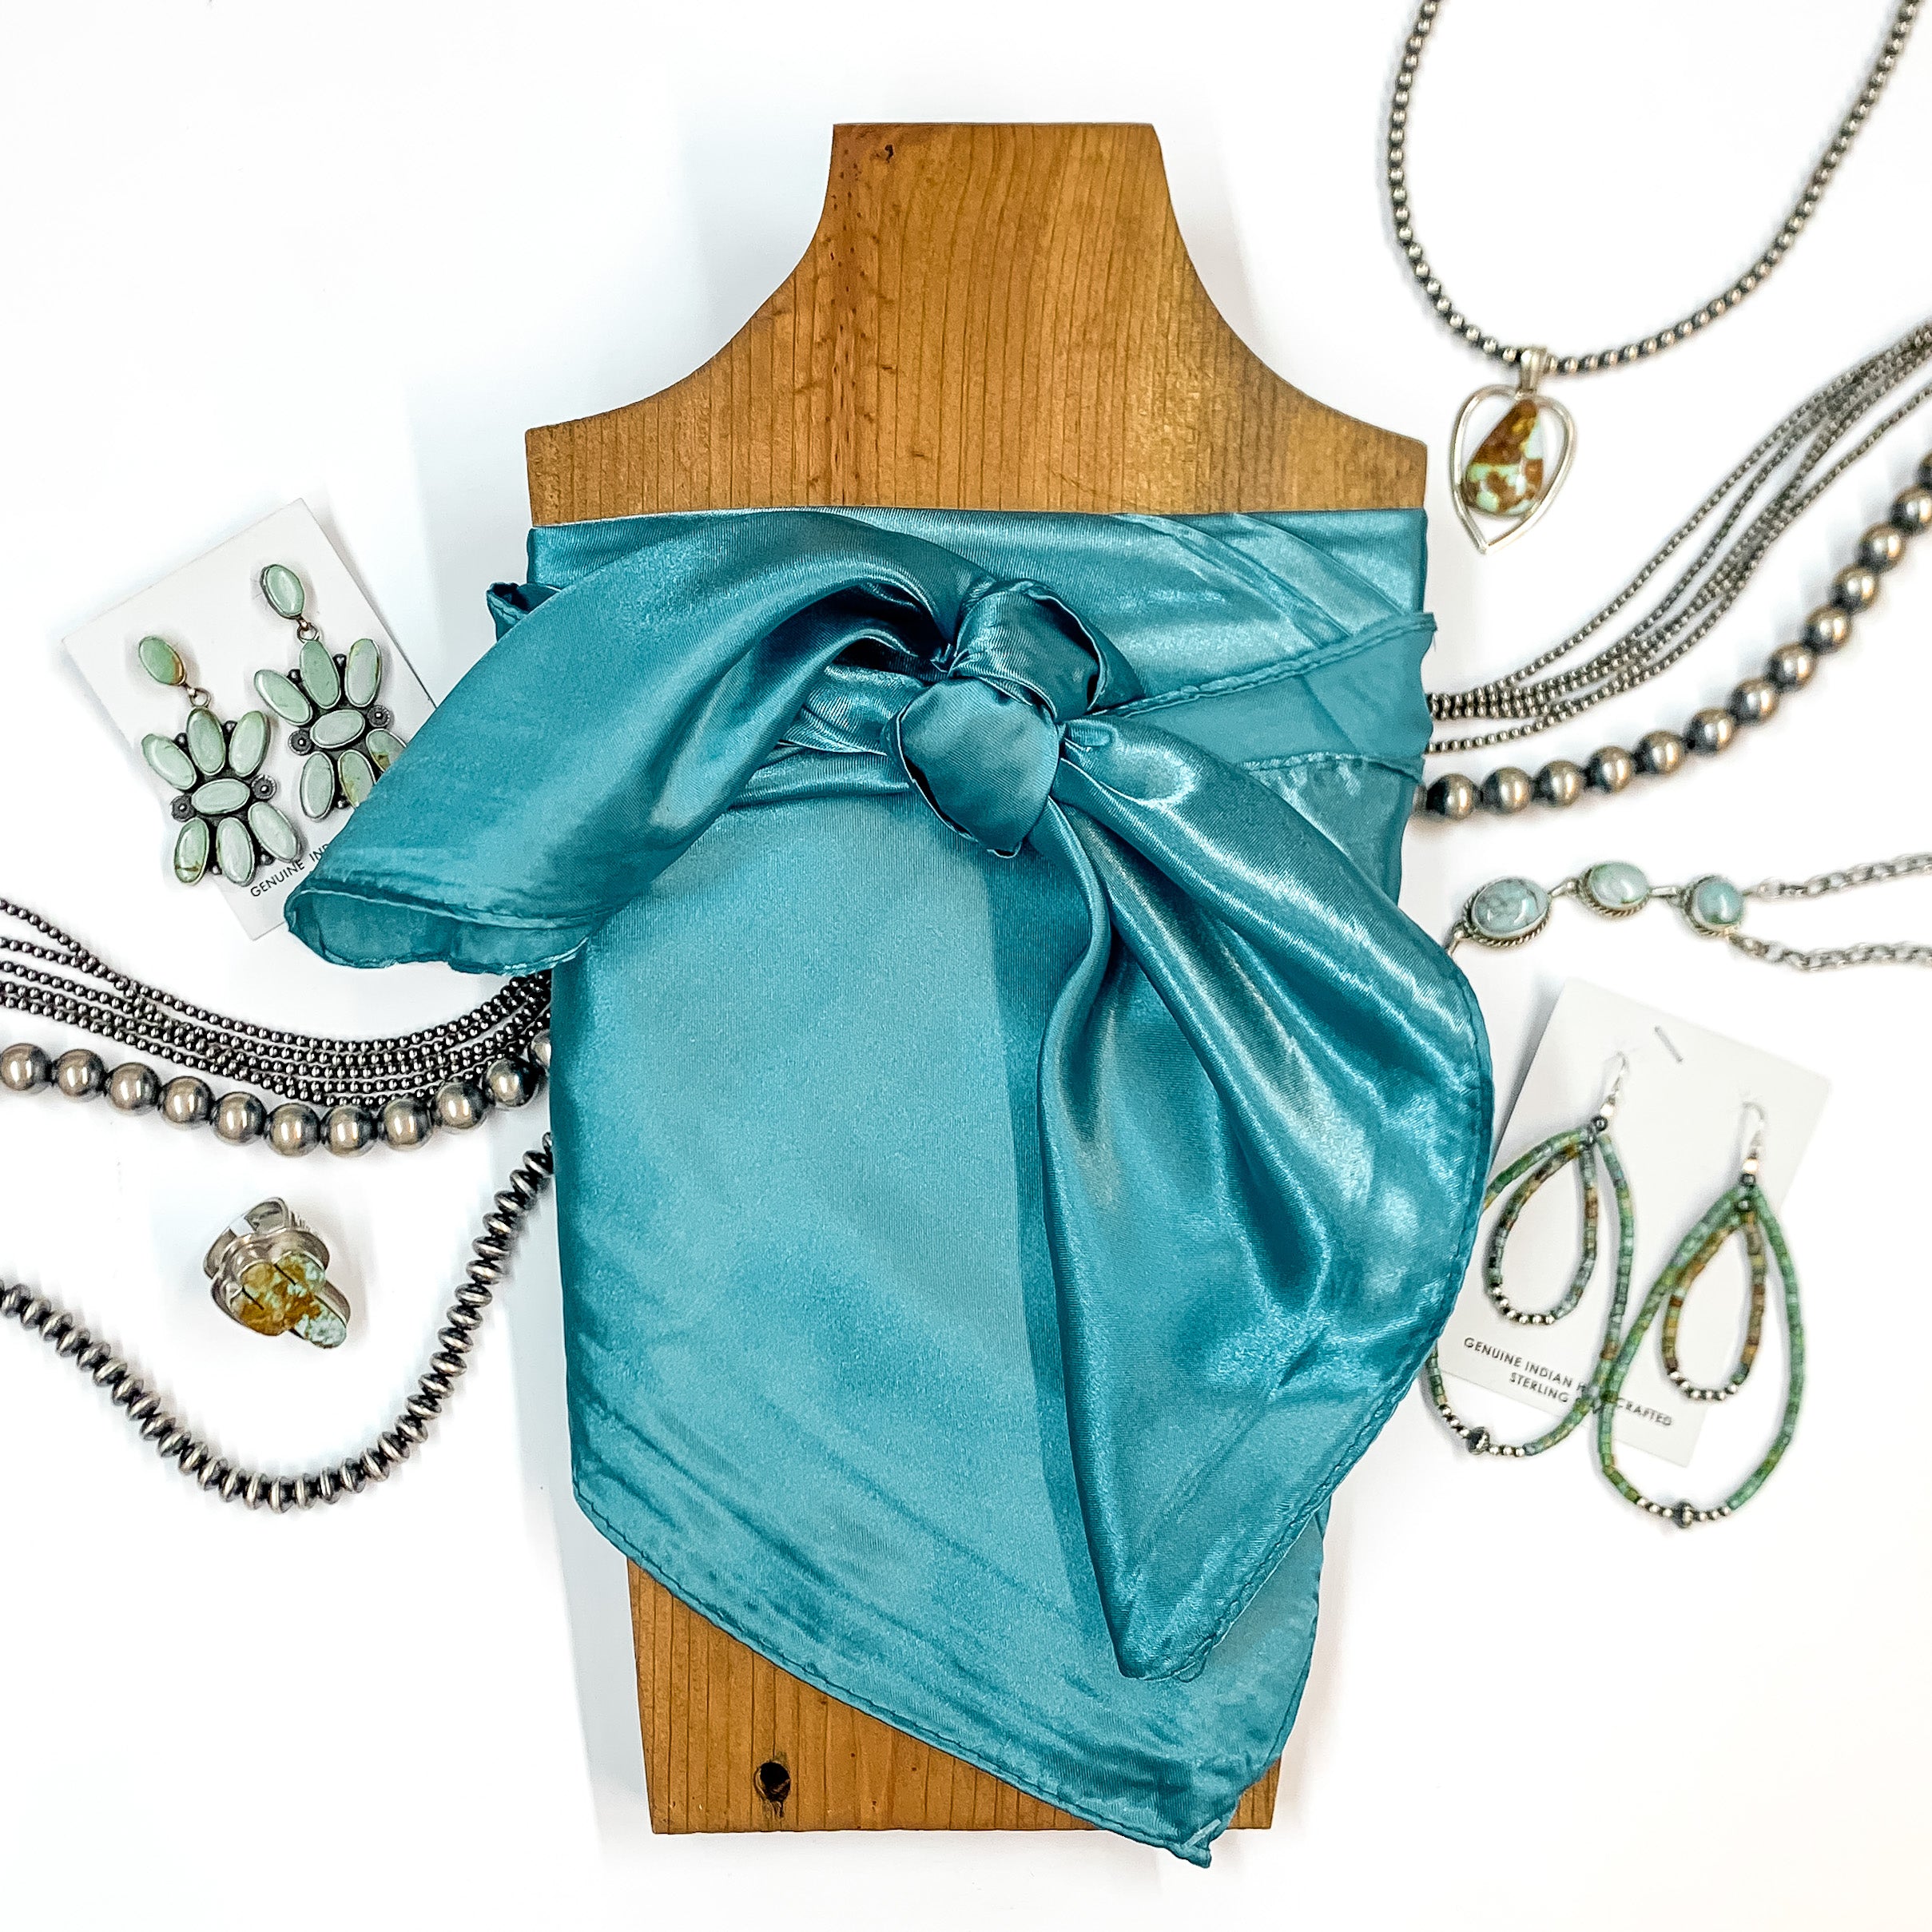 Solid colored scarf in Tuff turquoise. Scarf is tied around a wooden piece. The scarf and piece of wood is pictured on a white background with Navajo jewelry spread out around it.